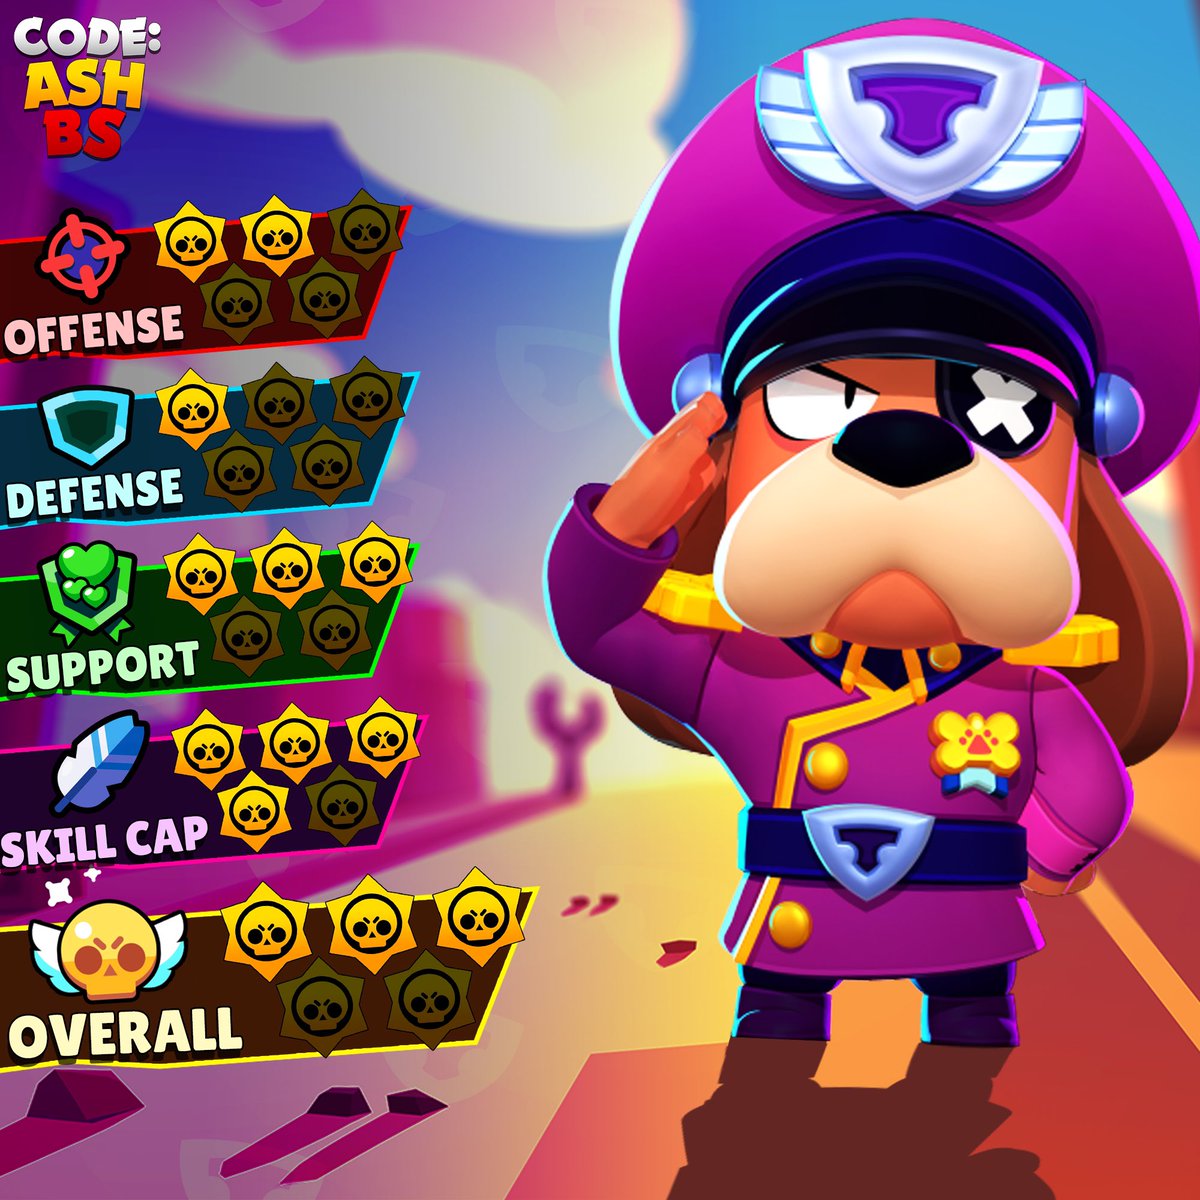 Code Ashbs On Twitter How Strong Is Colonel Ruffs He S Not A Very Strong Brawler And Doesn T Provide Much For Defense However He Has A High Skill Cap And Is A Great